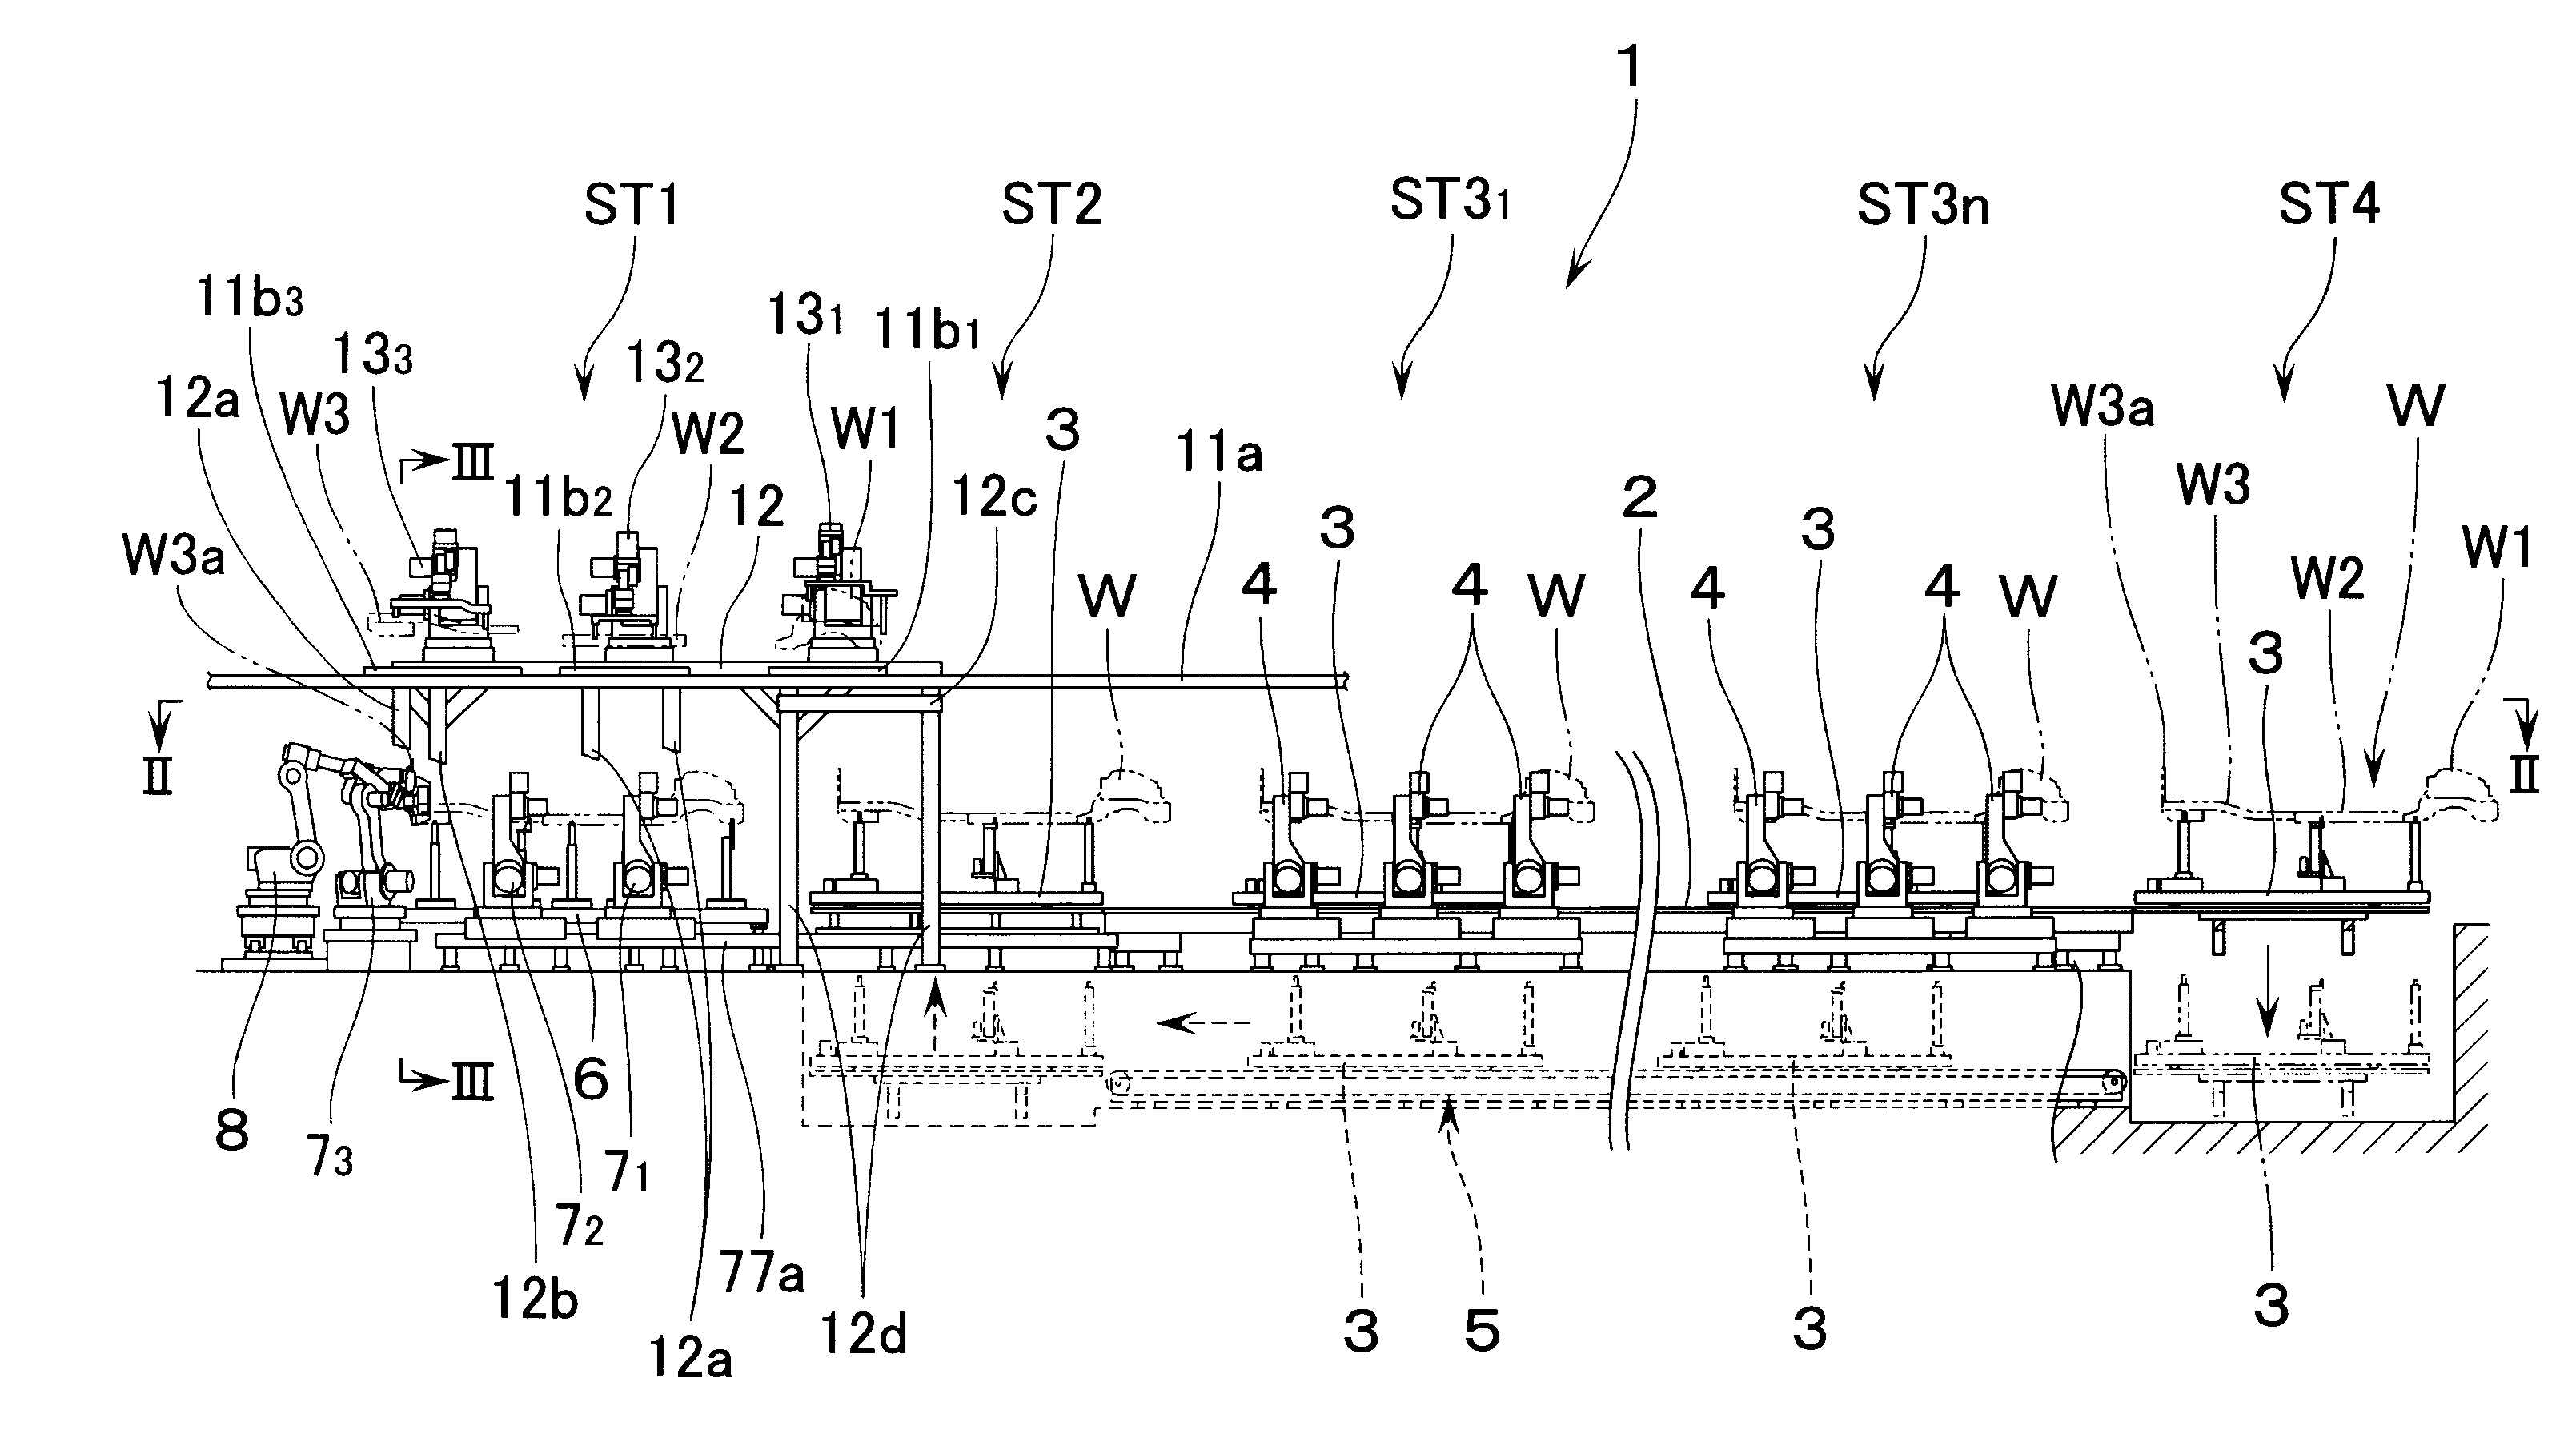 Apparatus for assembling floor of vehicle